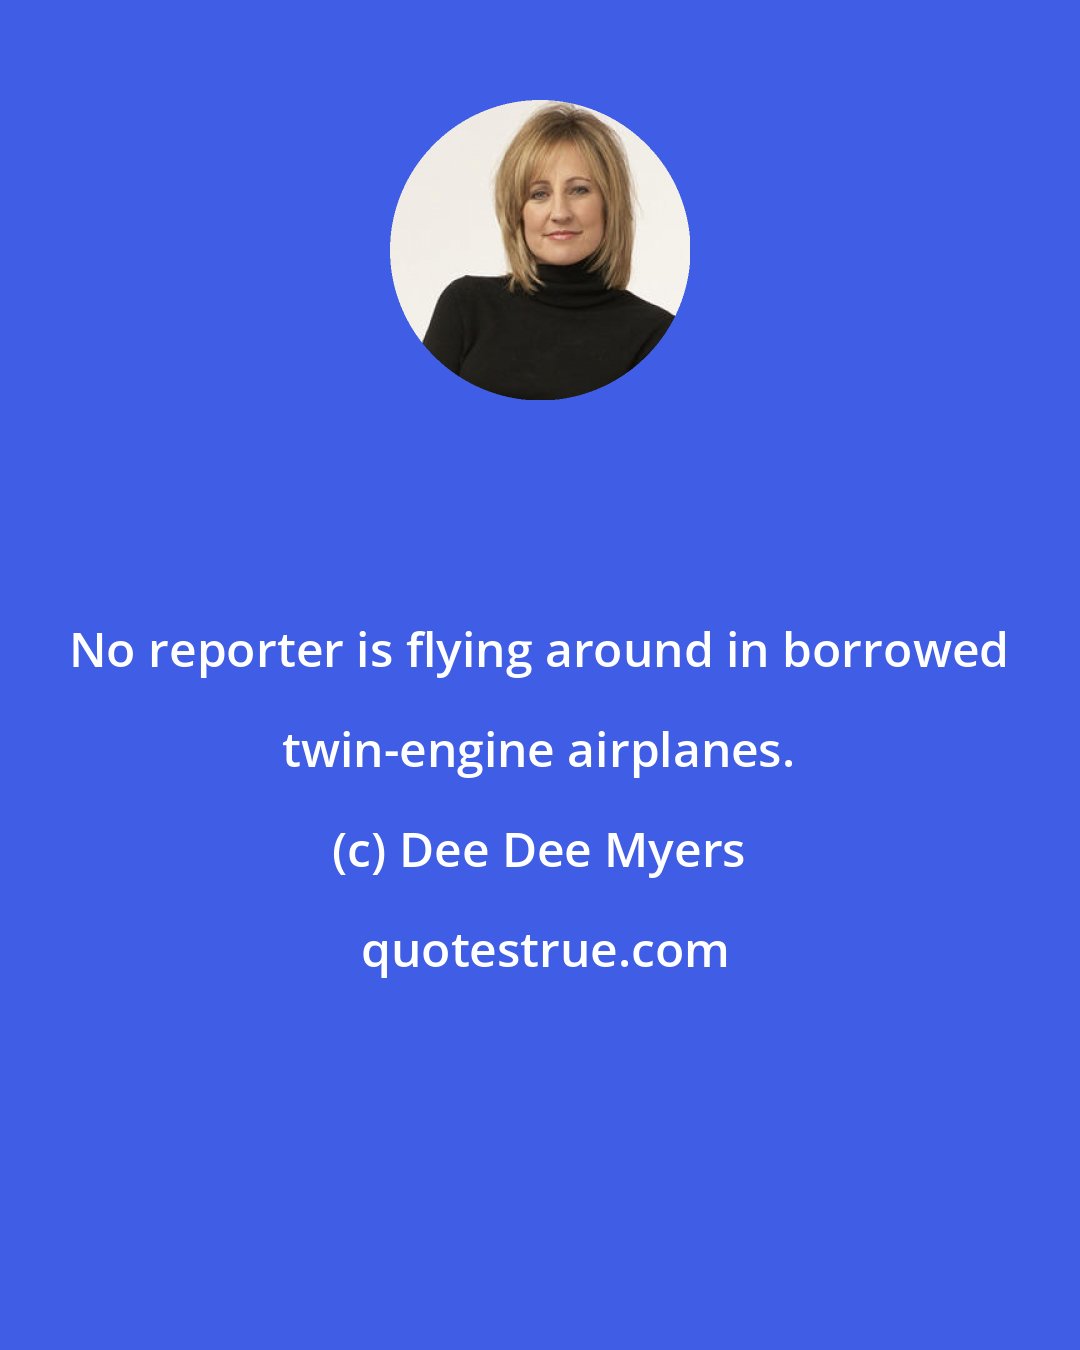 Dee Dee Myers: No reporter is flying around in borrowed twin-engine airplanes.